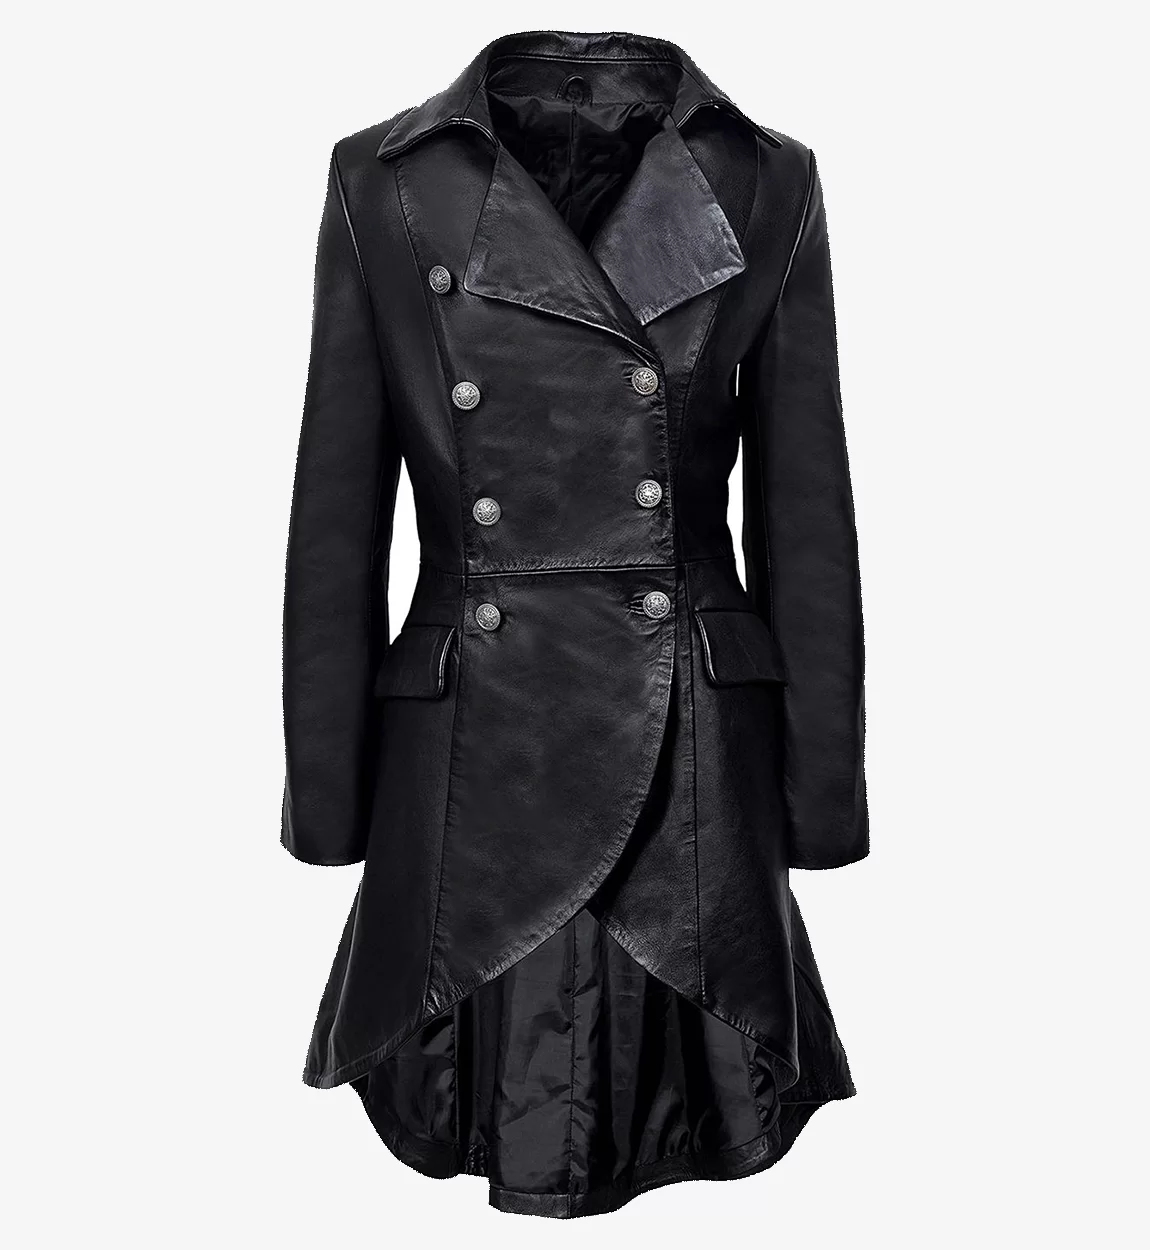 Womens-Gothic-Style-Back-Buckle-Real-Leather-Long-Coat.webp